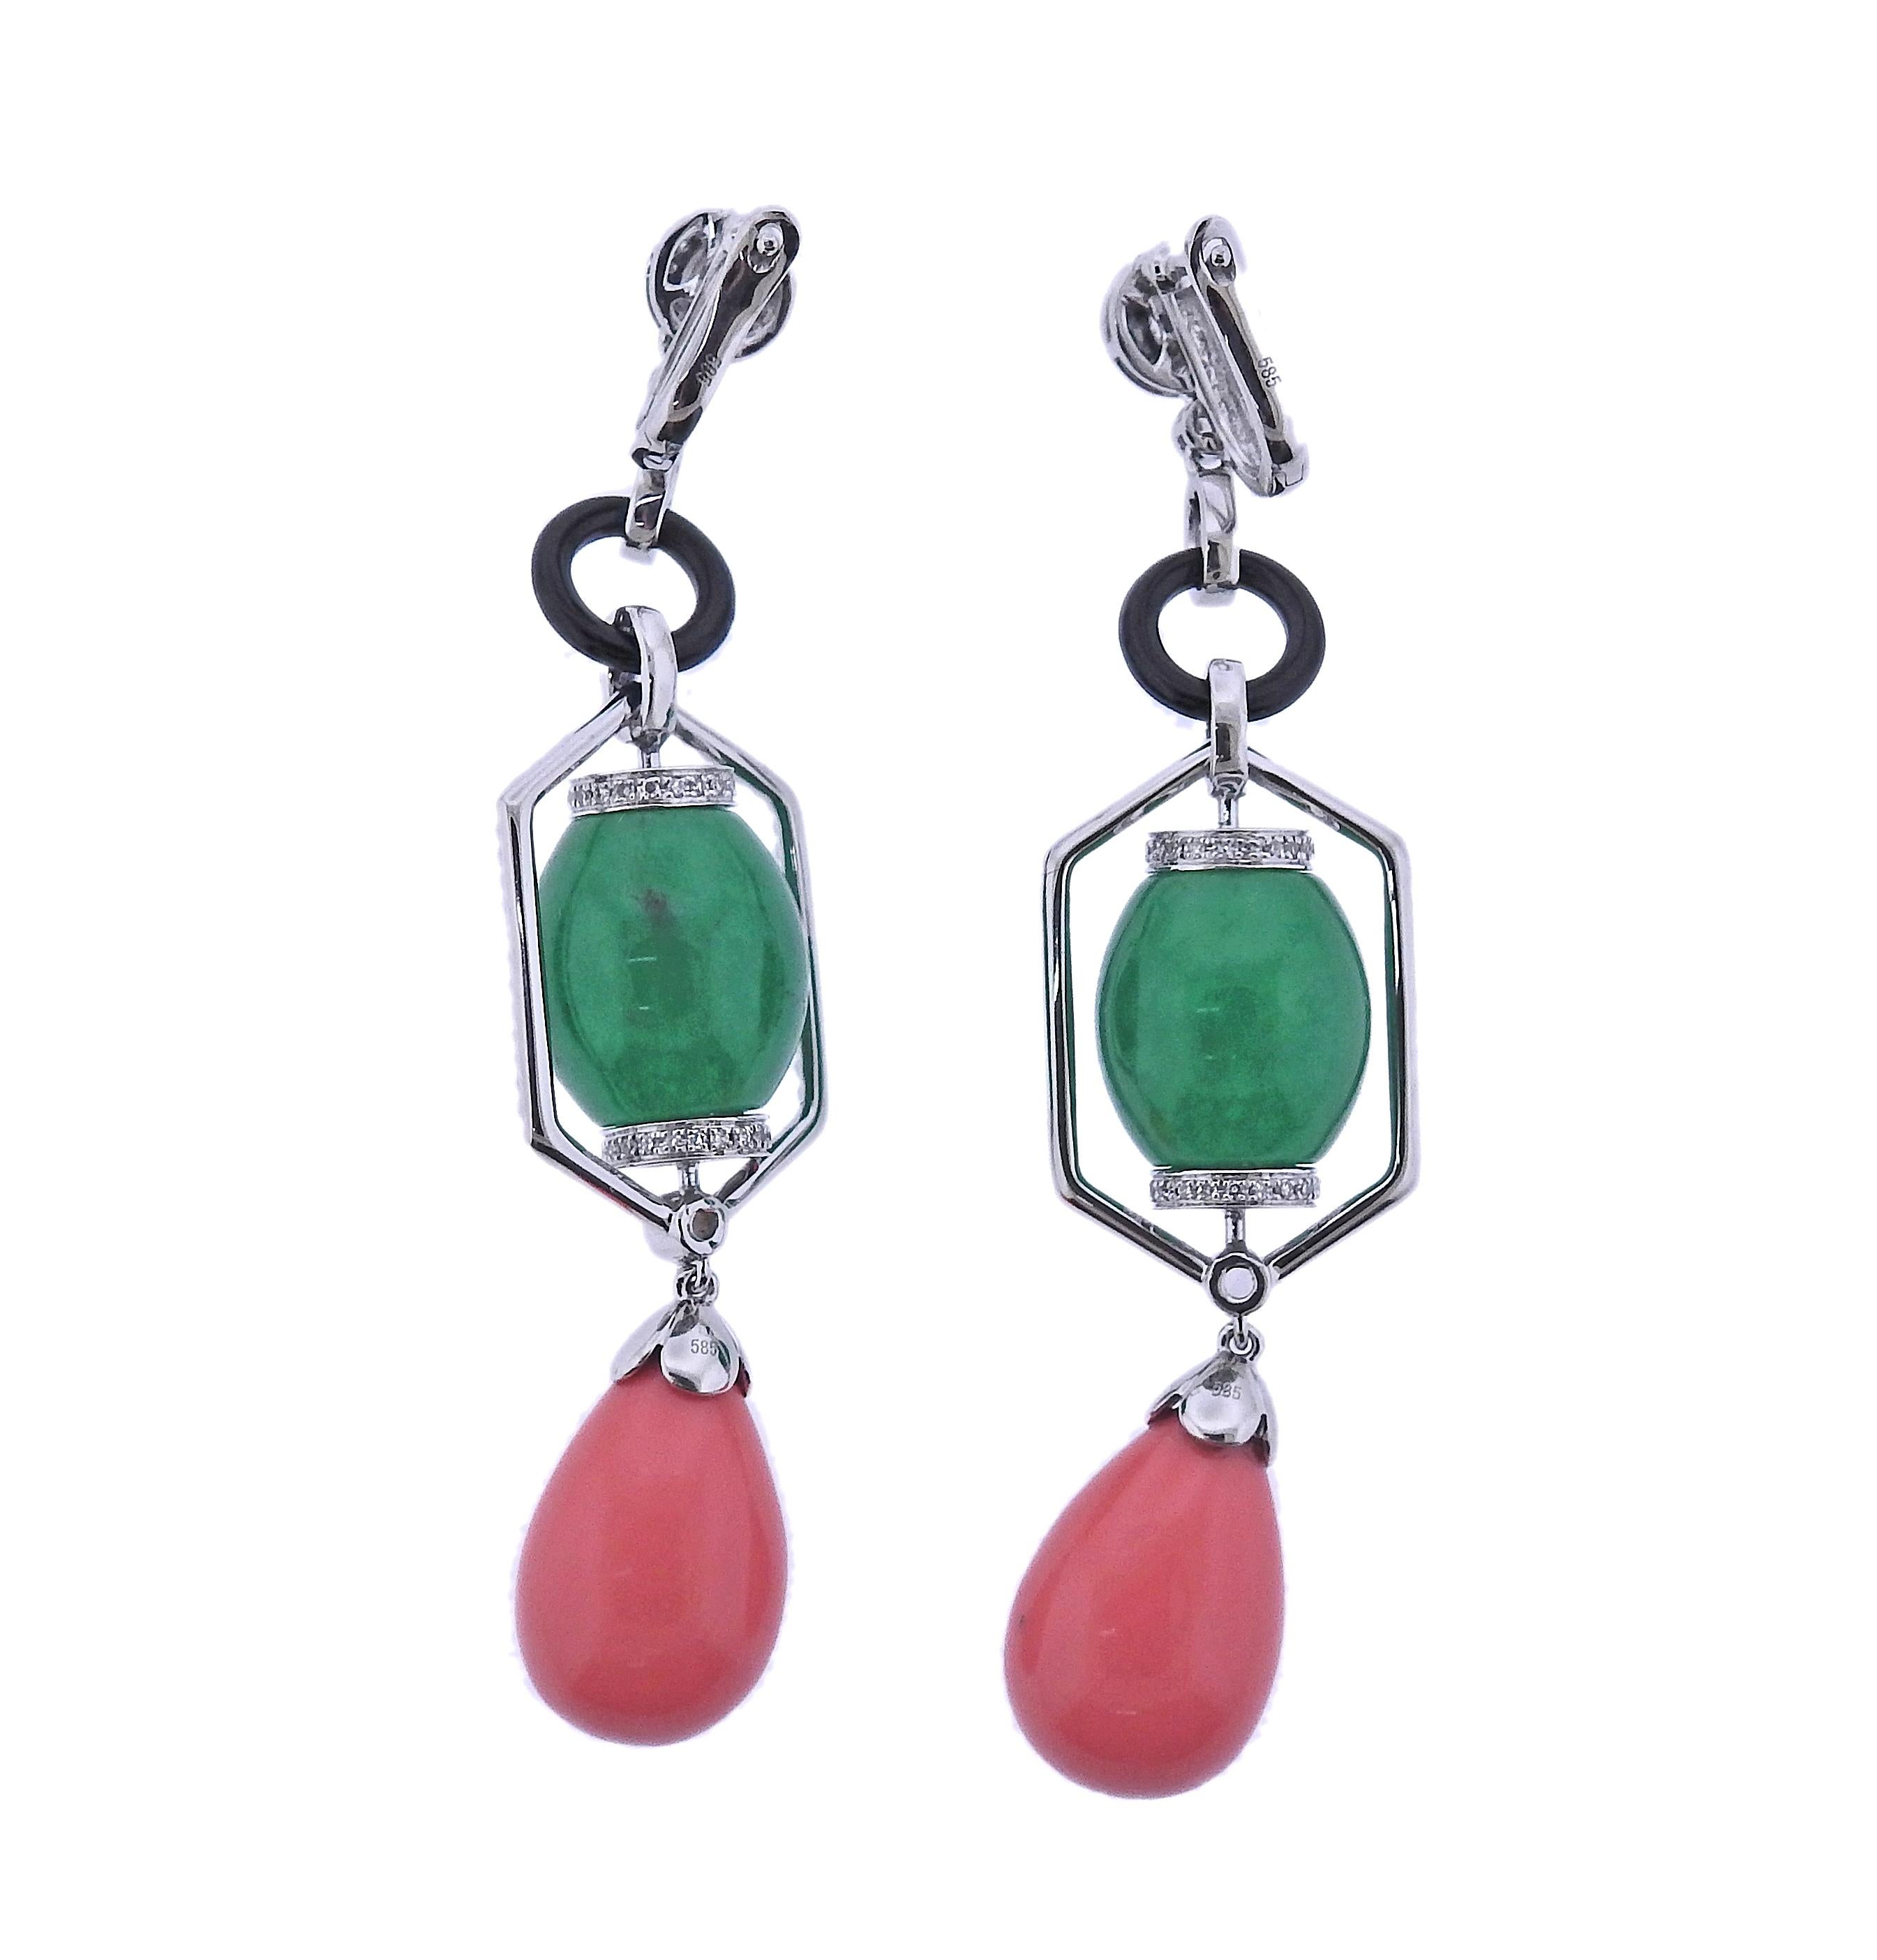 Pair of 14k gold long drop earrings, with 27.90ctw  jadeite jade, 15.64ctw coral, onyx and 0.79ctw in diamonds. Earrings are 72mm long. Marked 585. Weight - 21.1 grams.